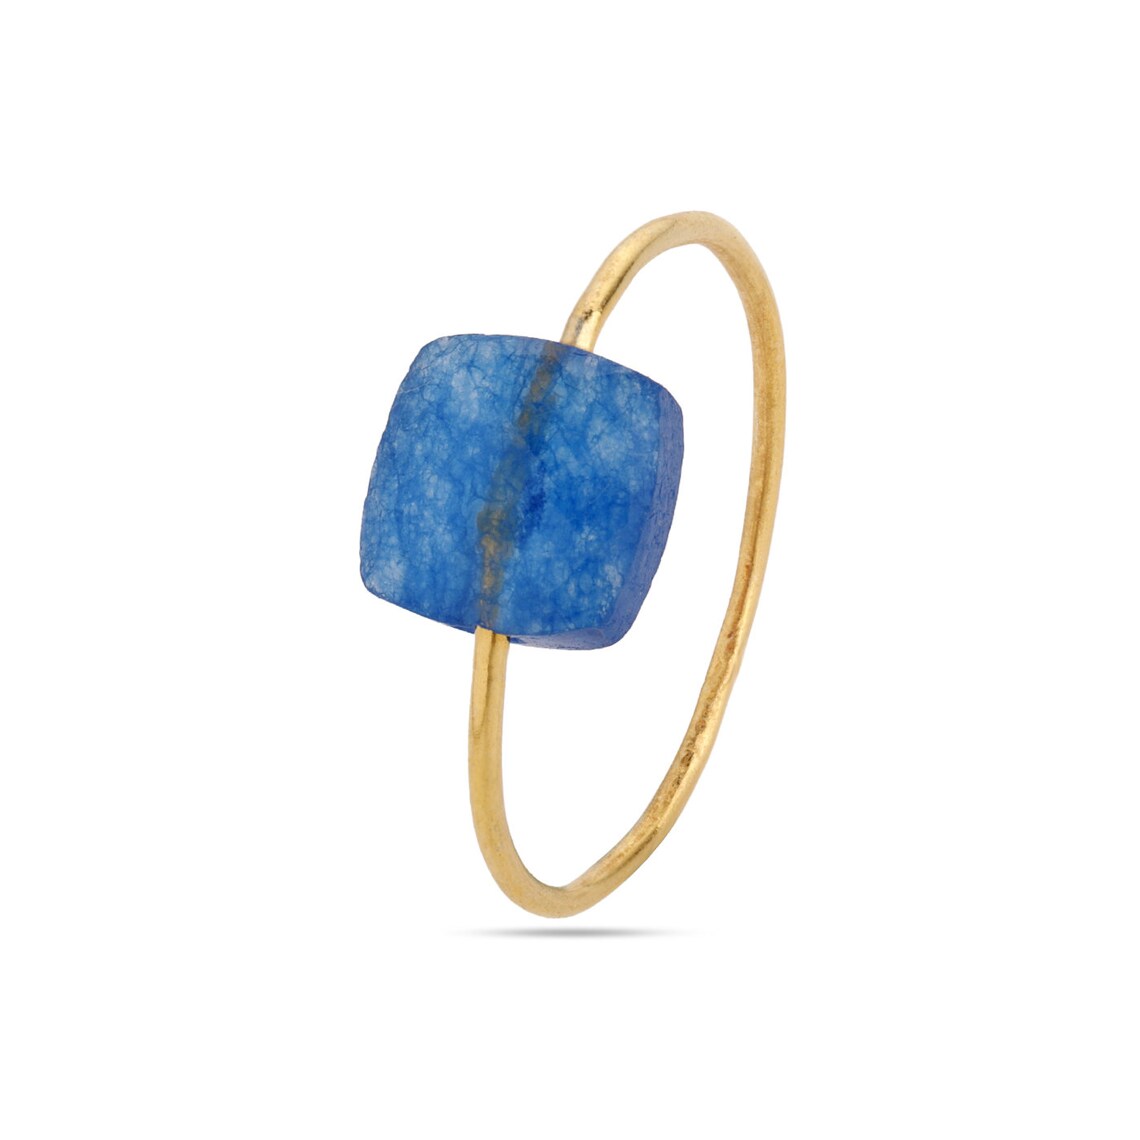 Sterling Silver Ring with Cushion Shape Blue Quartz Stone - Gold Plated